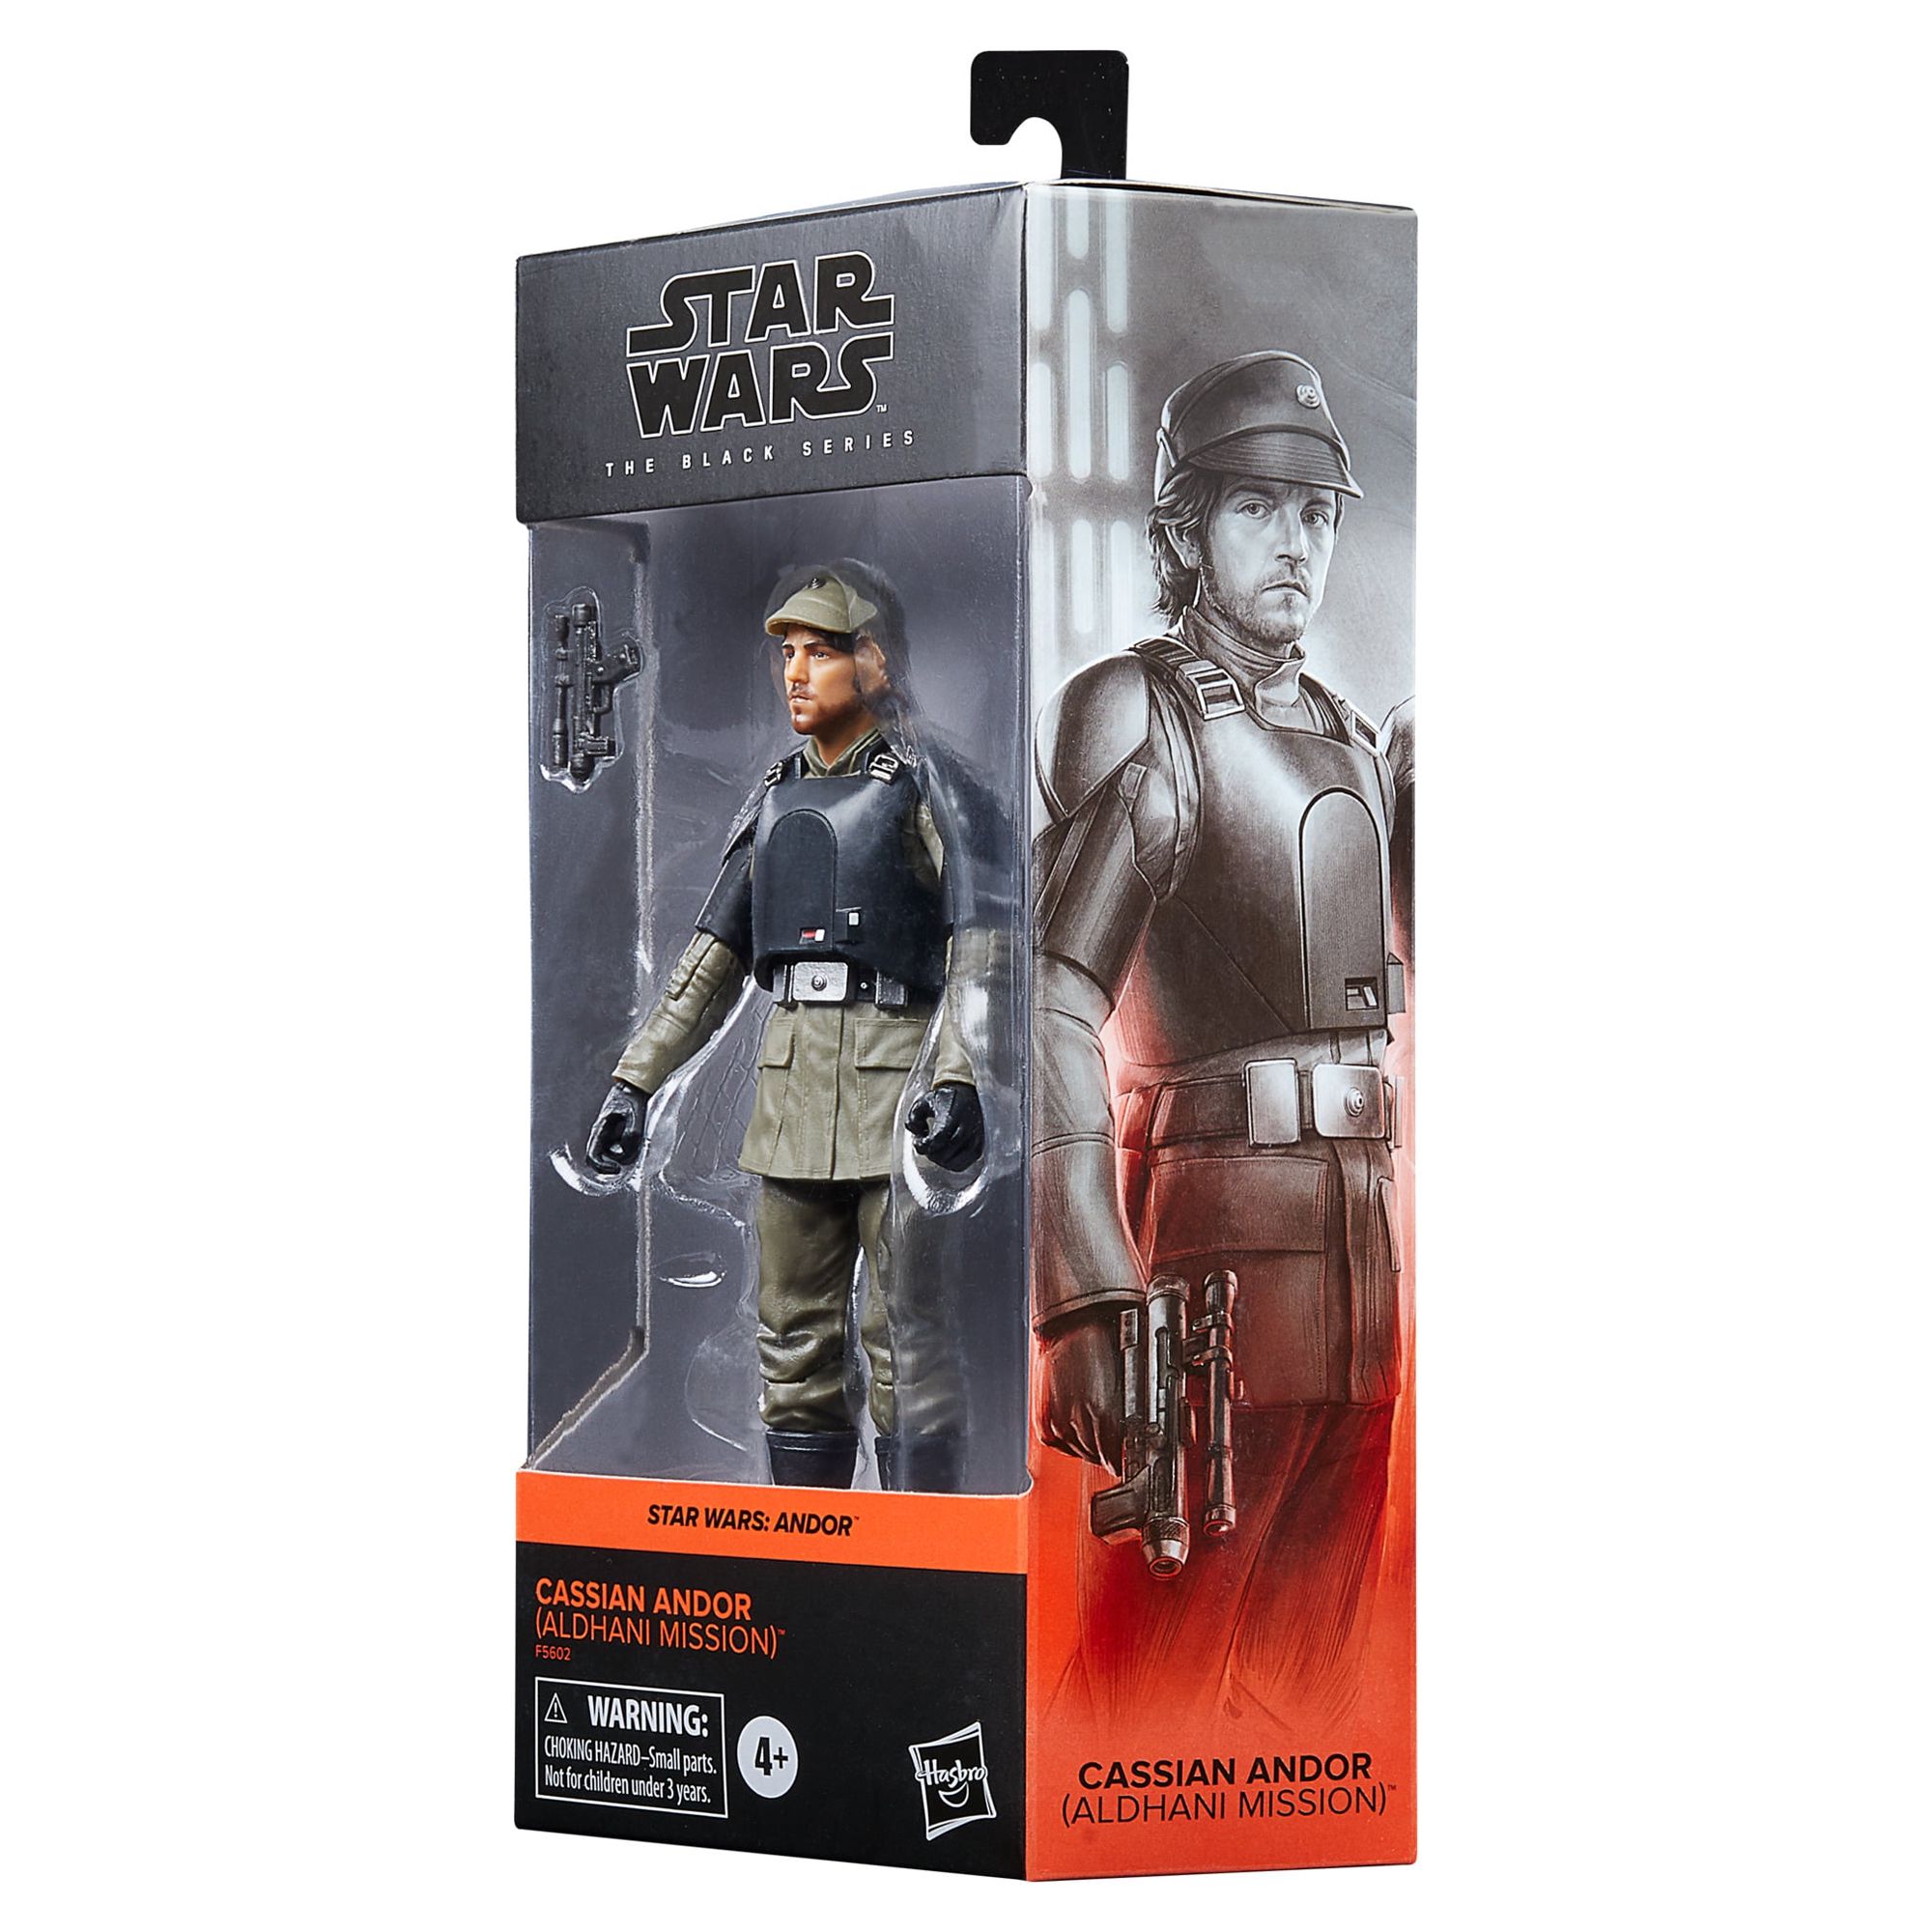 Star Wars: the Black Series Cassian Andor (Aldhani Mission) Kids Toy Action Figure for Boys and Girls Ages 4 5 6 7 8 and Up, Only At Walmart - image 5 of 9